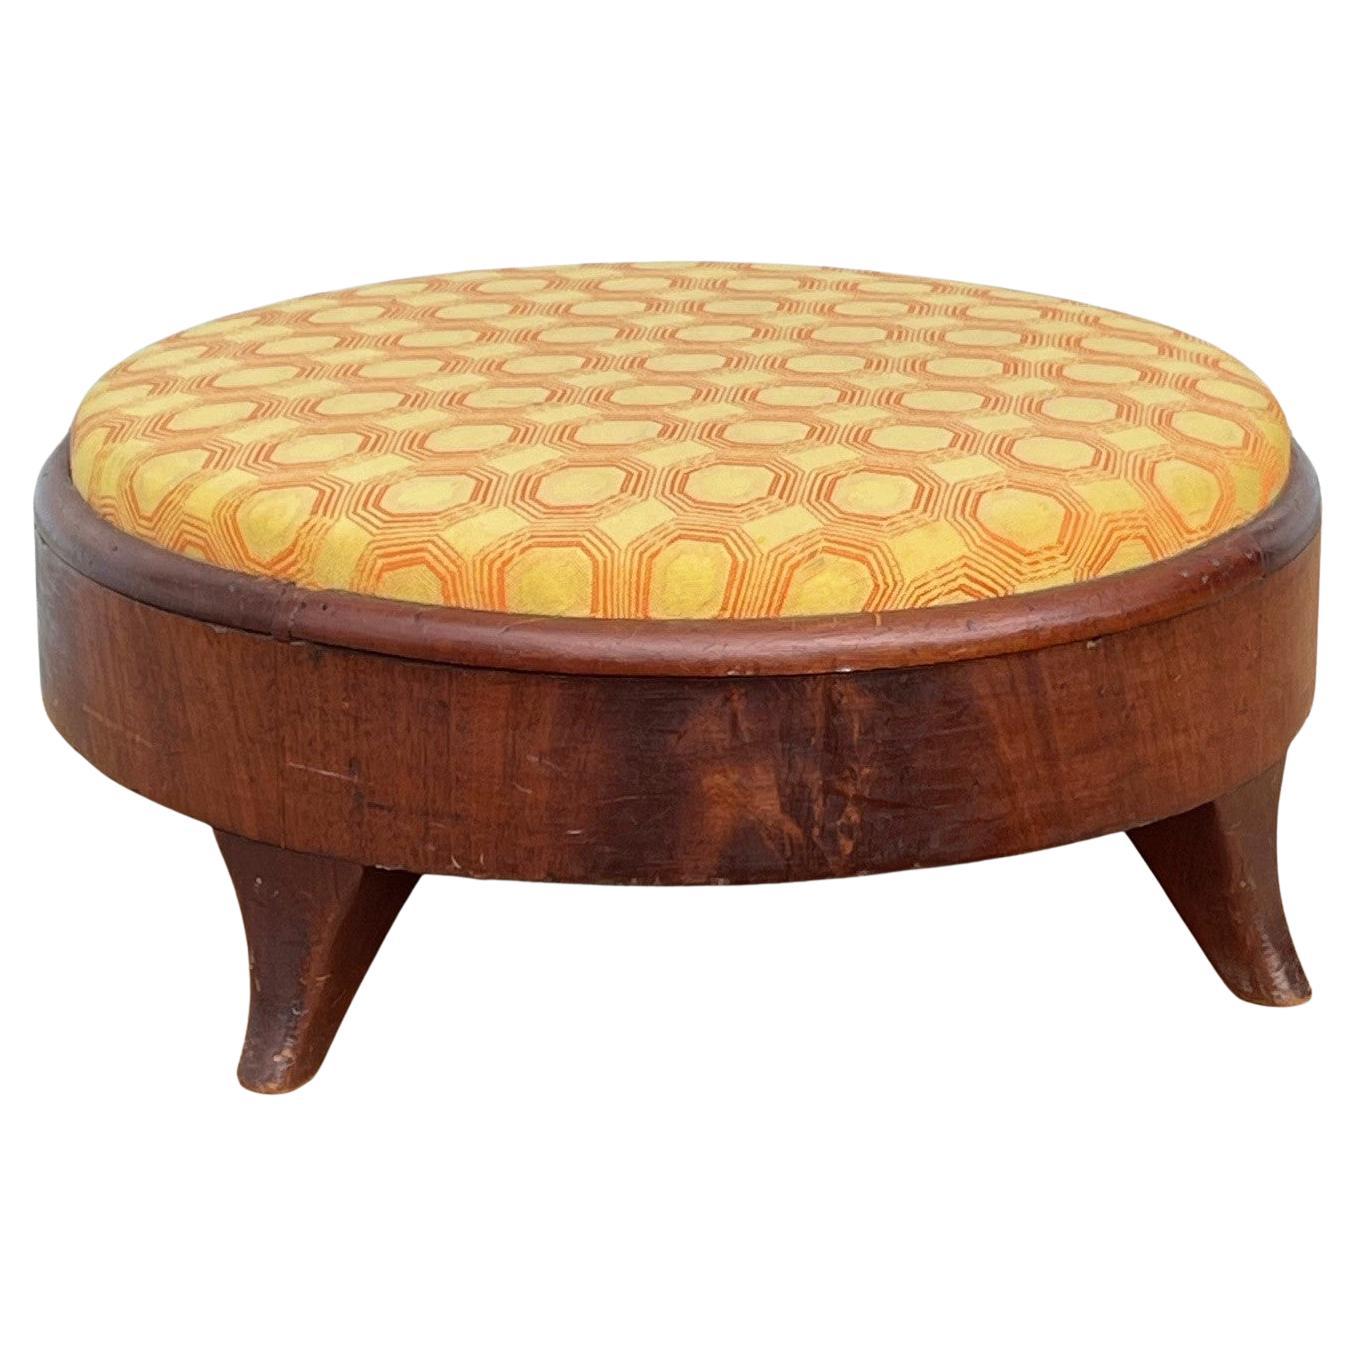 19th Century American Empire Round Upholstered Footstool. For Sale